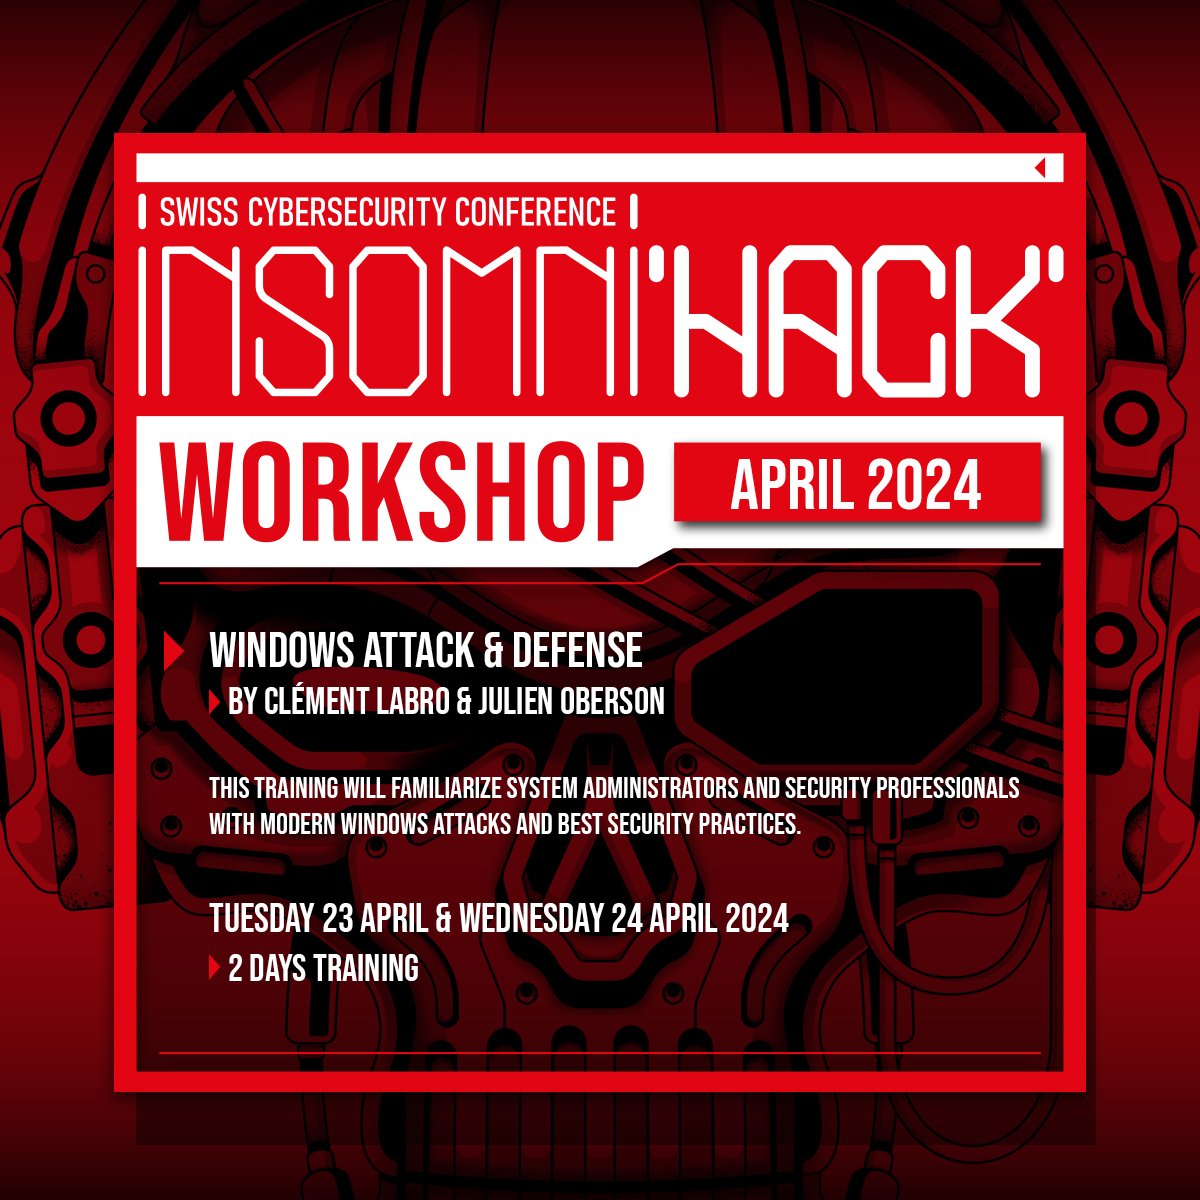 🚨Insomni'hack 2024: [WORKSHOP] Windows Attack & Defense by Clément Labro & Julien Oberson. 👉Don’t miss this opportunity to attend this 2-days workshop at Insomni’hack 2024! Details and registration: ow.ly/pYvo50QsY0P #INSO24 #Insomnihack #cybersecurity